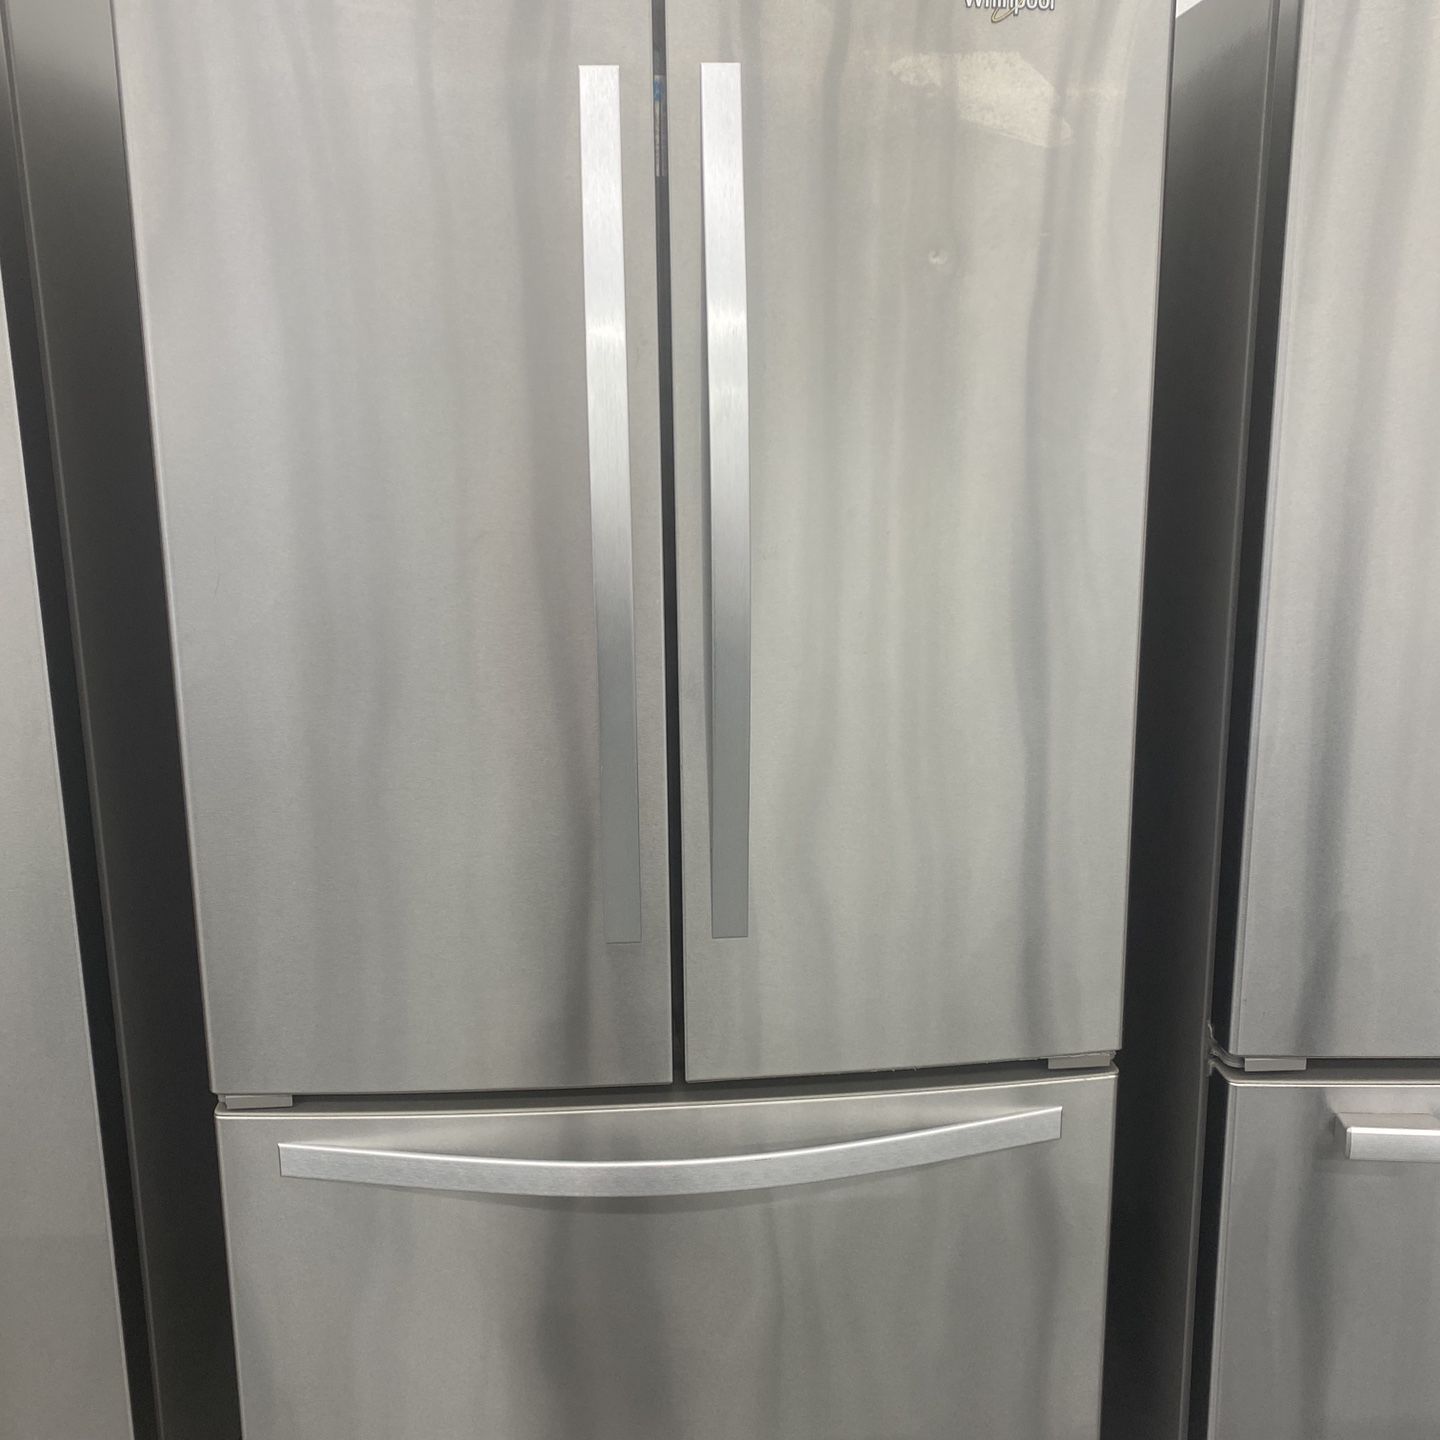 Stainless Steel Whirlpool French Door Refrigerator with Freezer Drawer